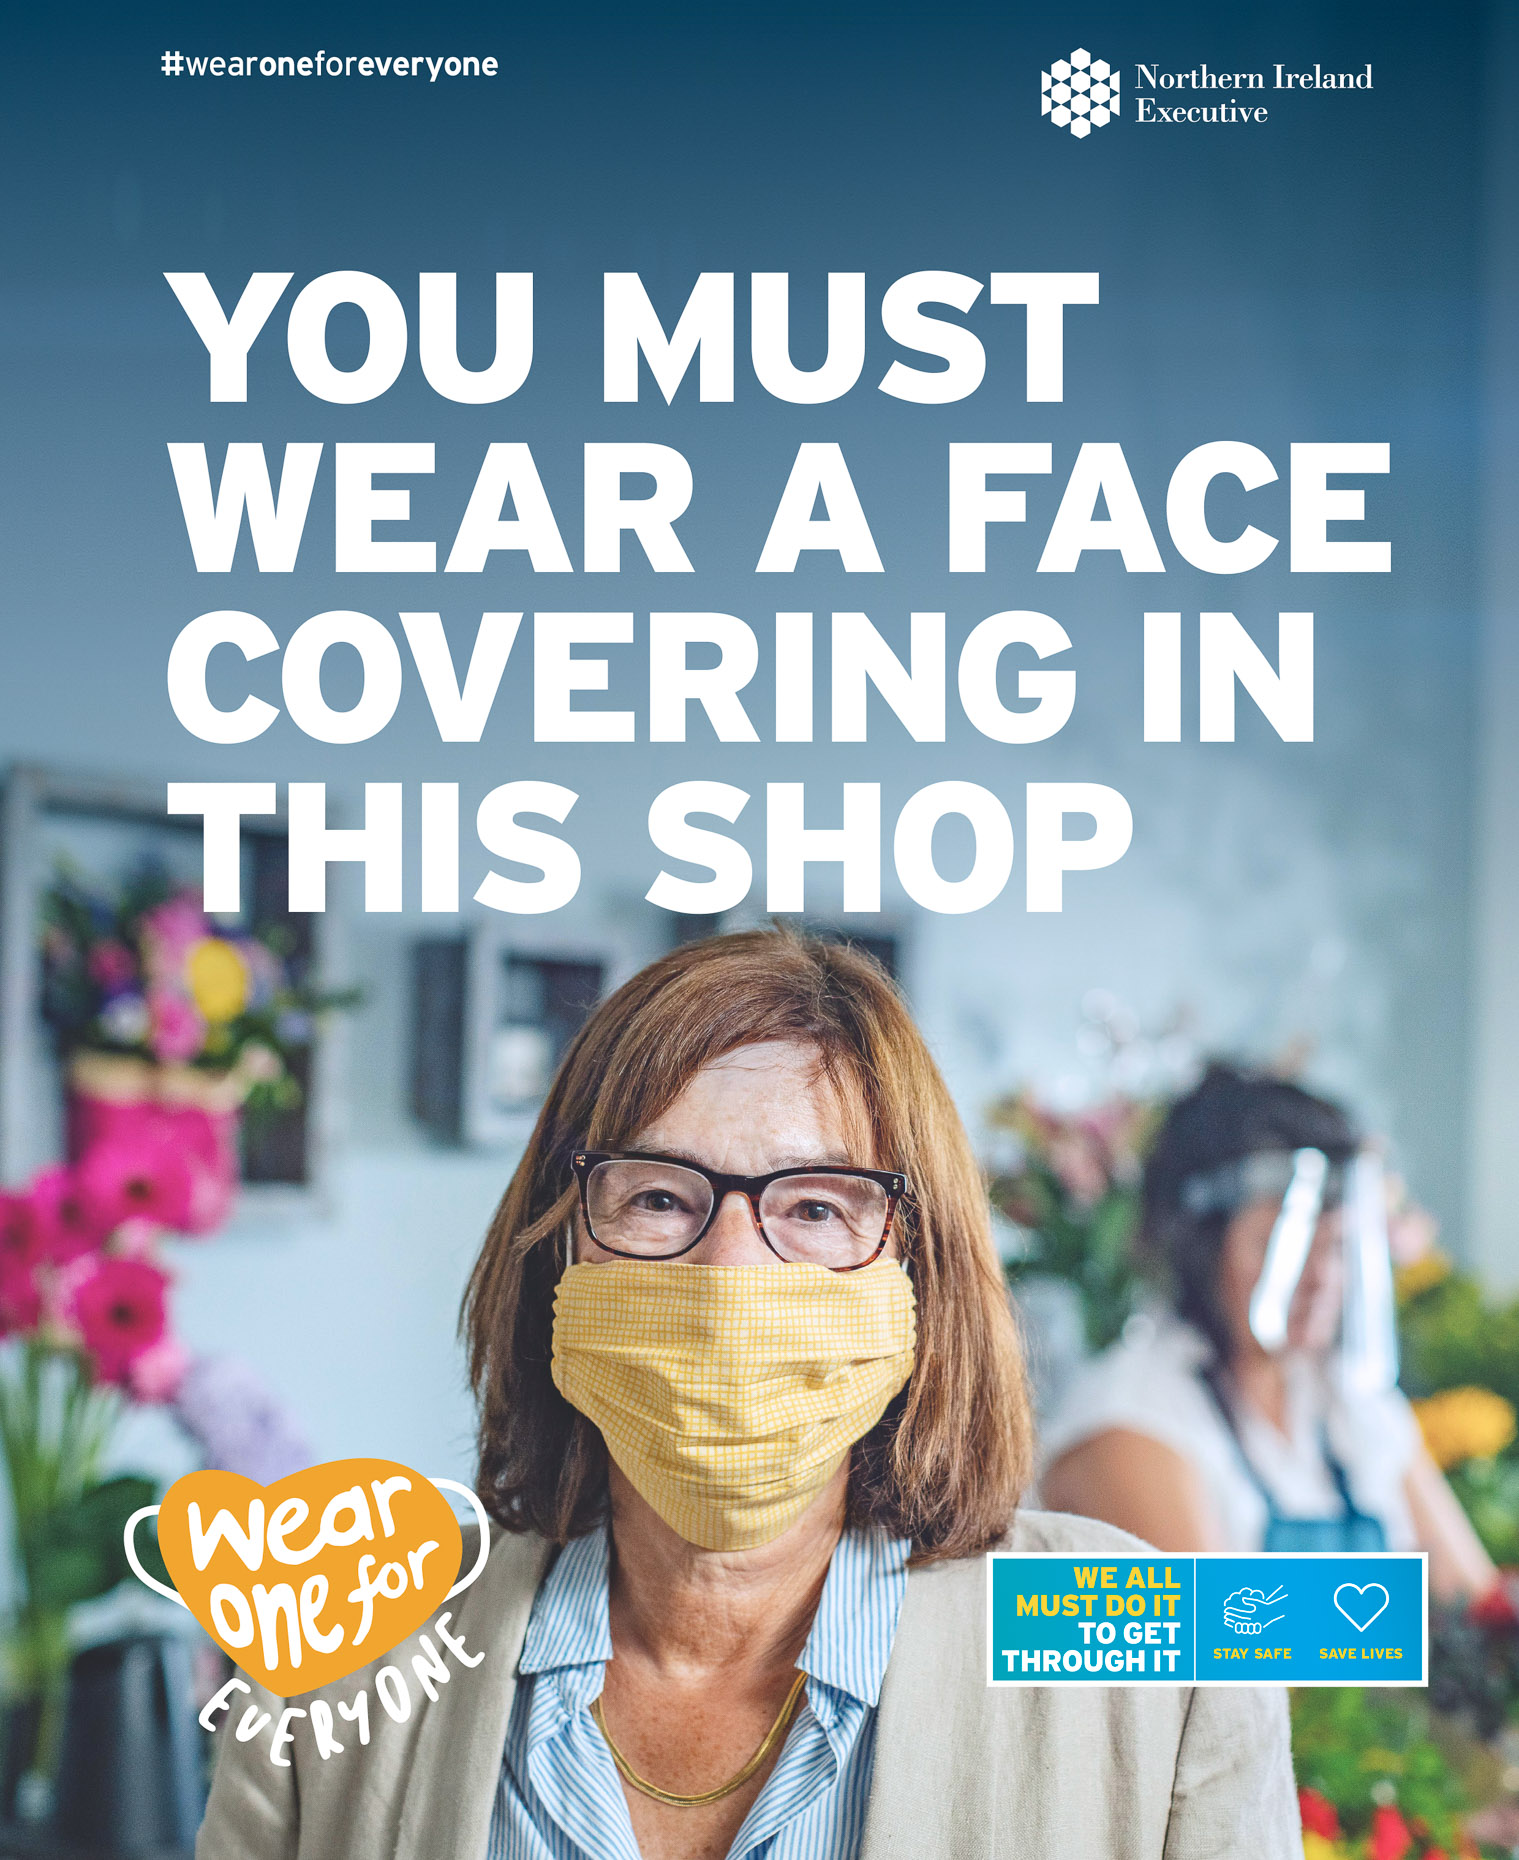 You must wear a face covering in this shop.